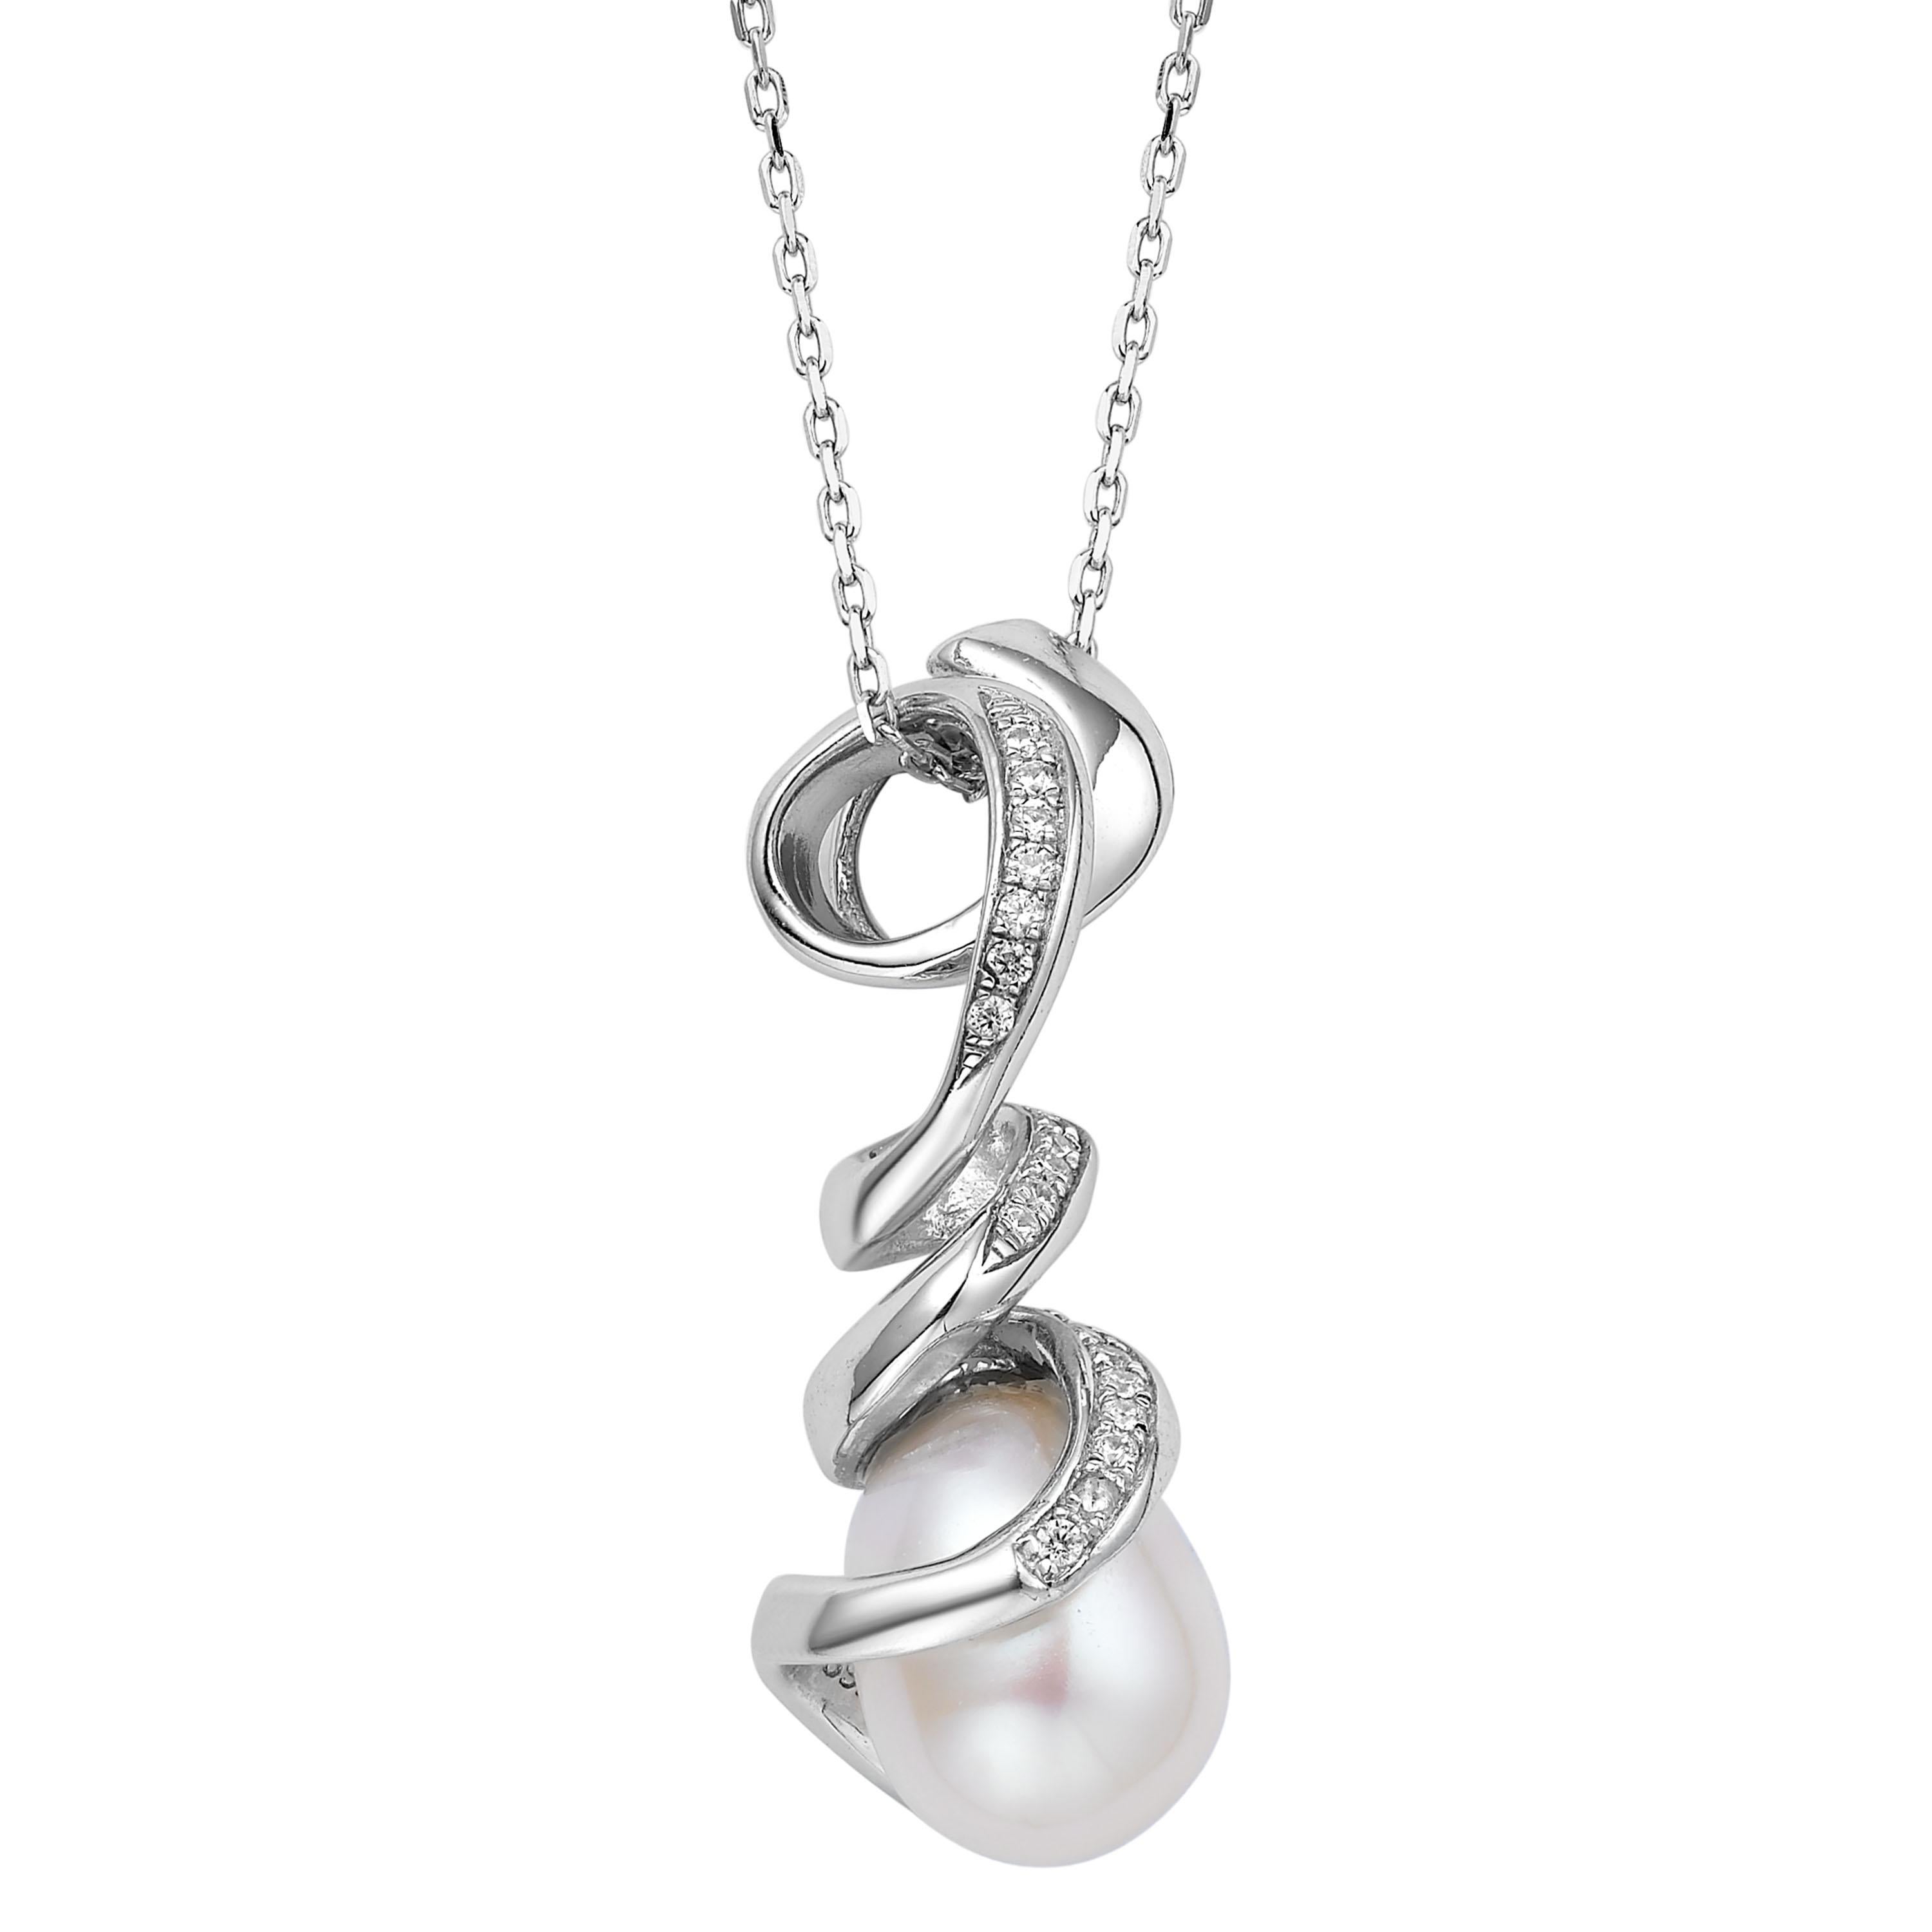 Mirroring the movement of the graceful ballet dancer, the Pirouette pendant features a delicate swirl of sterling silver. With scintillating precision-cut cubic zirconia and lustrous pearl, this pendant is a perfect accompaniment for work or an